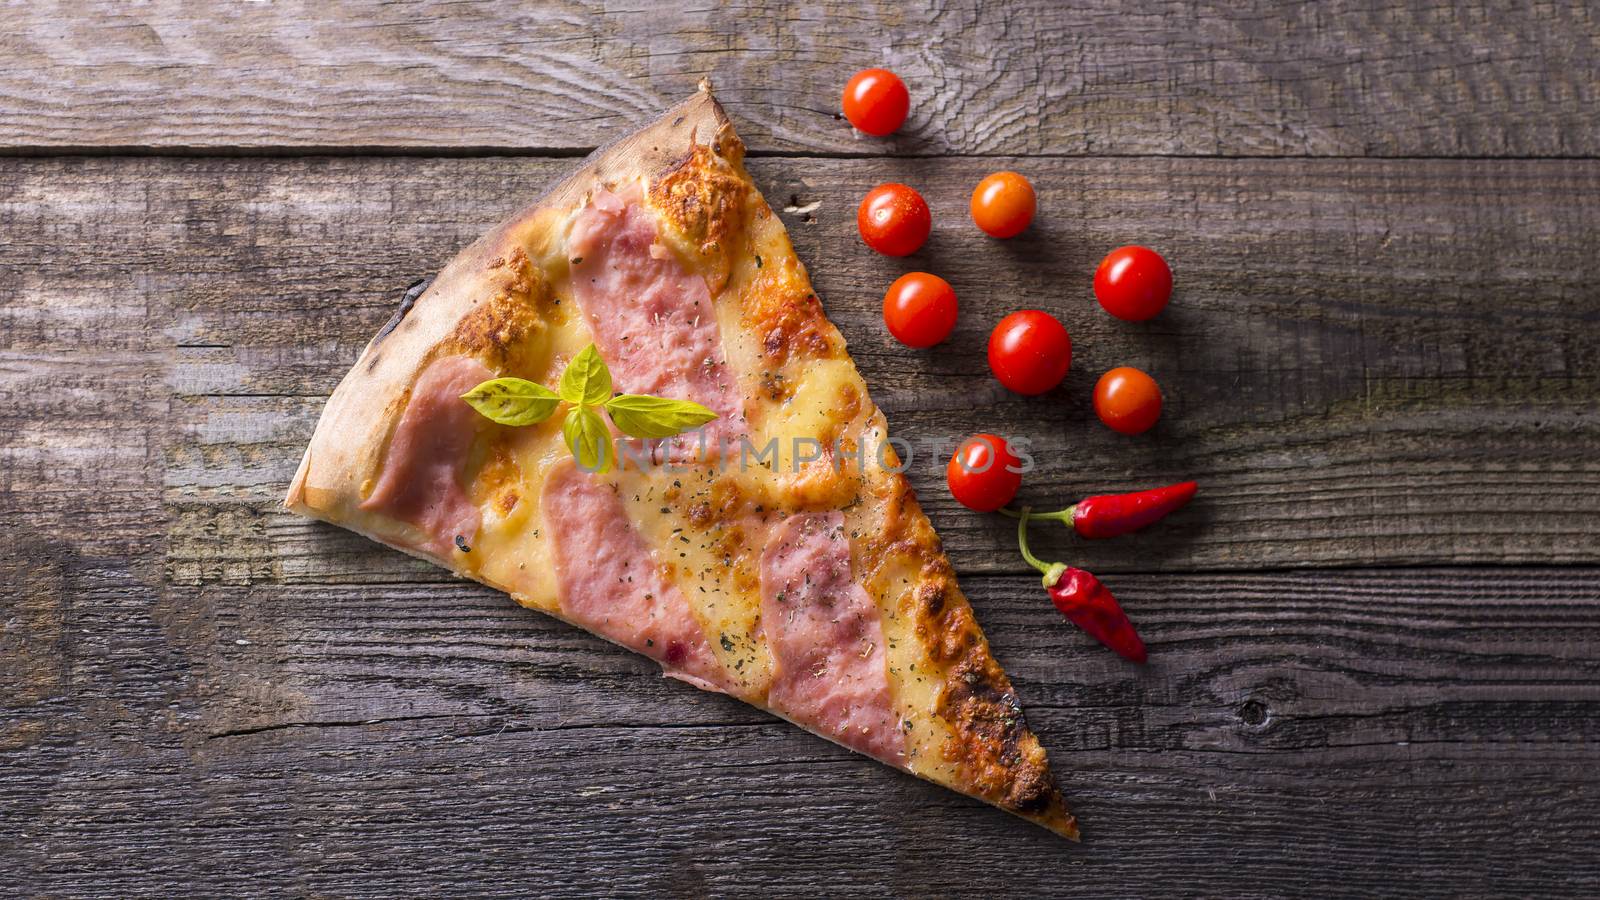 Pizza cut, cherry tomato and hot peppers by adamr